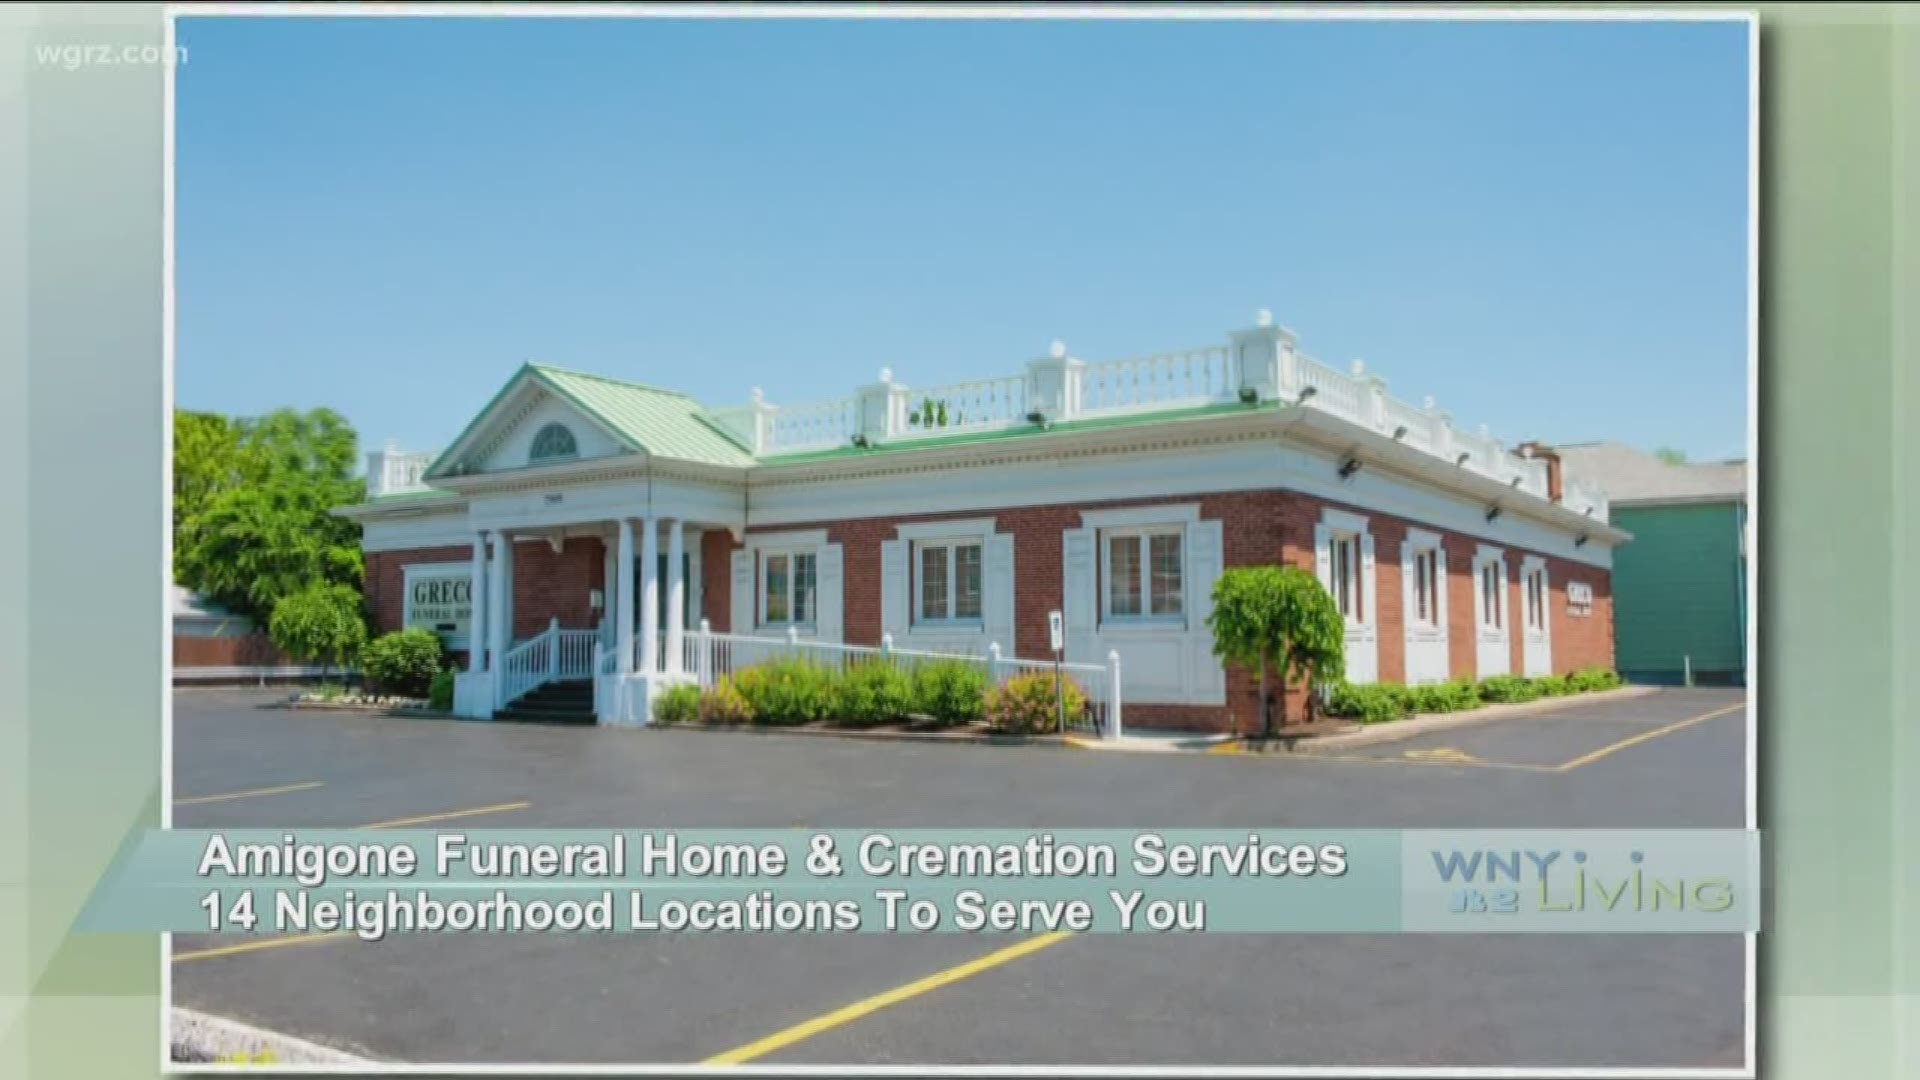 October 19 - Amigone Funeral Home (THIS VIDEO IS SPONSORED BY AMIGONE FUNERAL HOME)